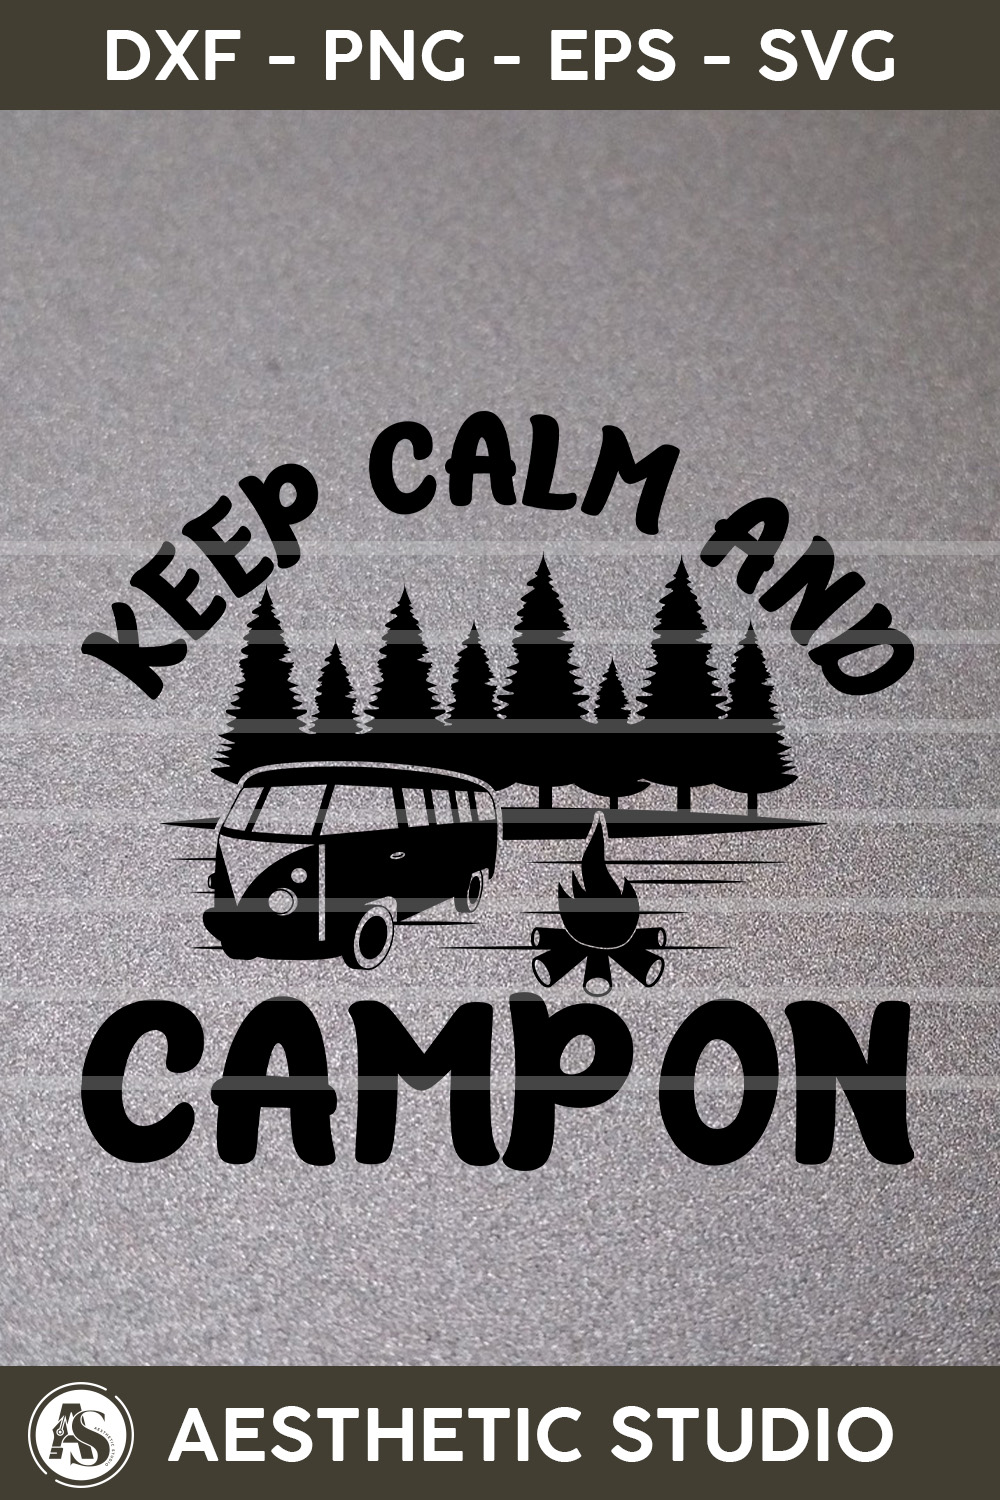 Keep Calm And Camp On, Camper, Adventure, Camp Life, Camping Svg, Typography, Camping Quotes, Camping Cut File, Funny Camping, Camping T-shirt Design, Svg, Eps, Dxf, Png, Cut file pinterest preview image.